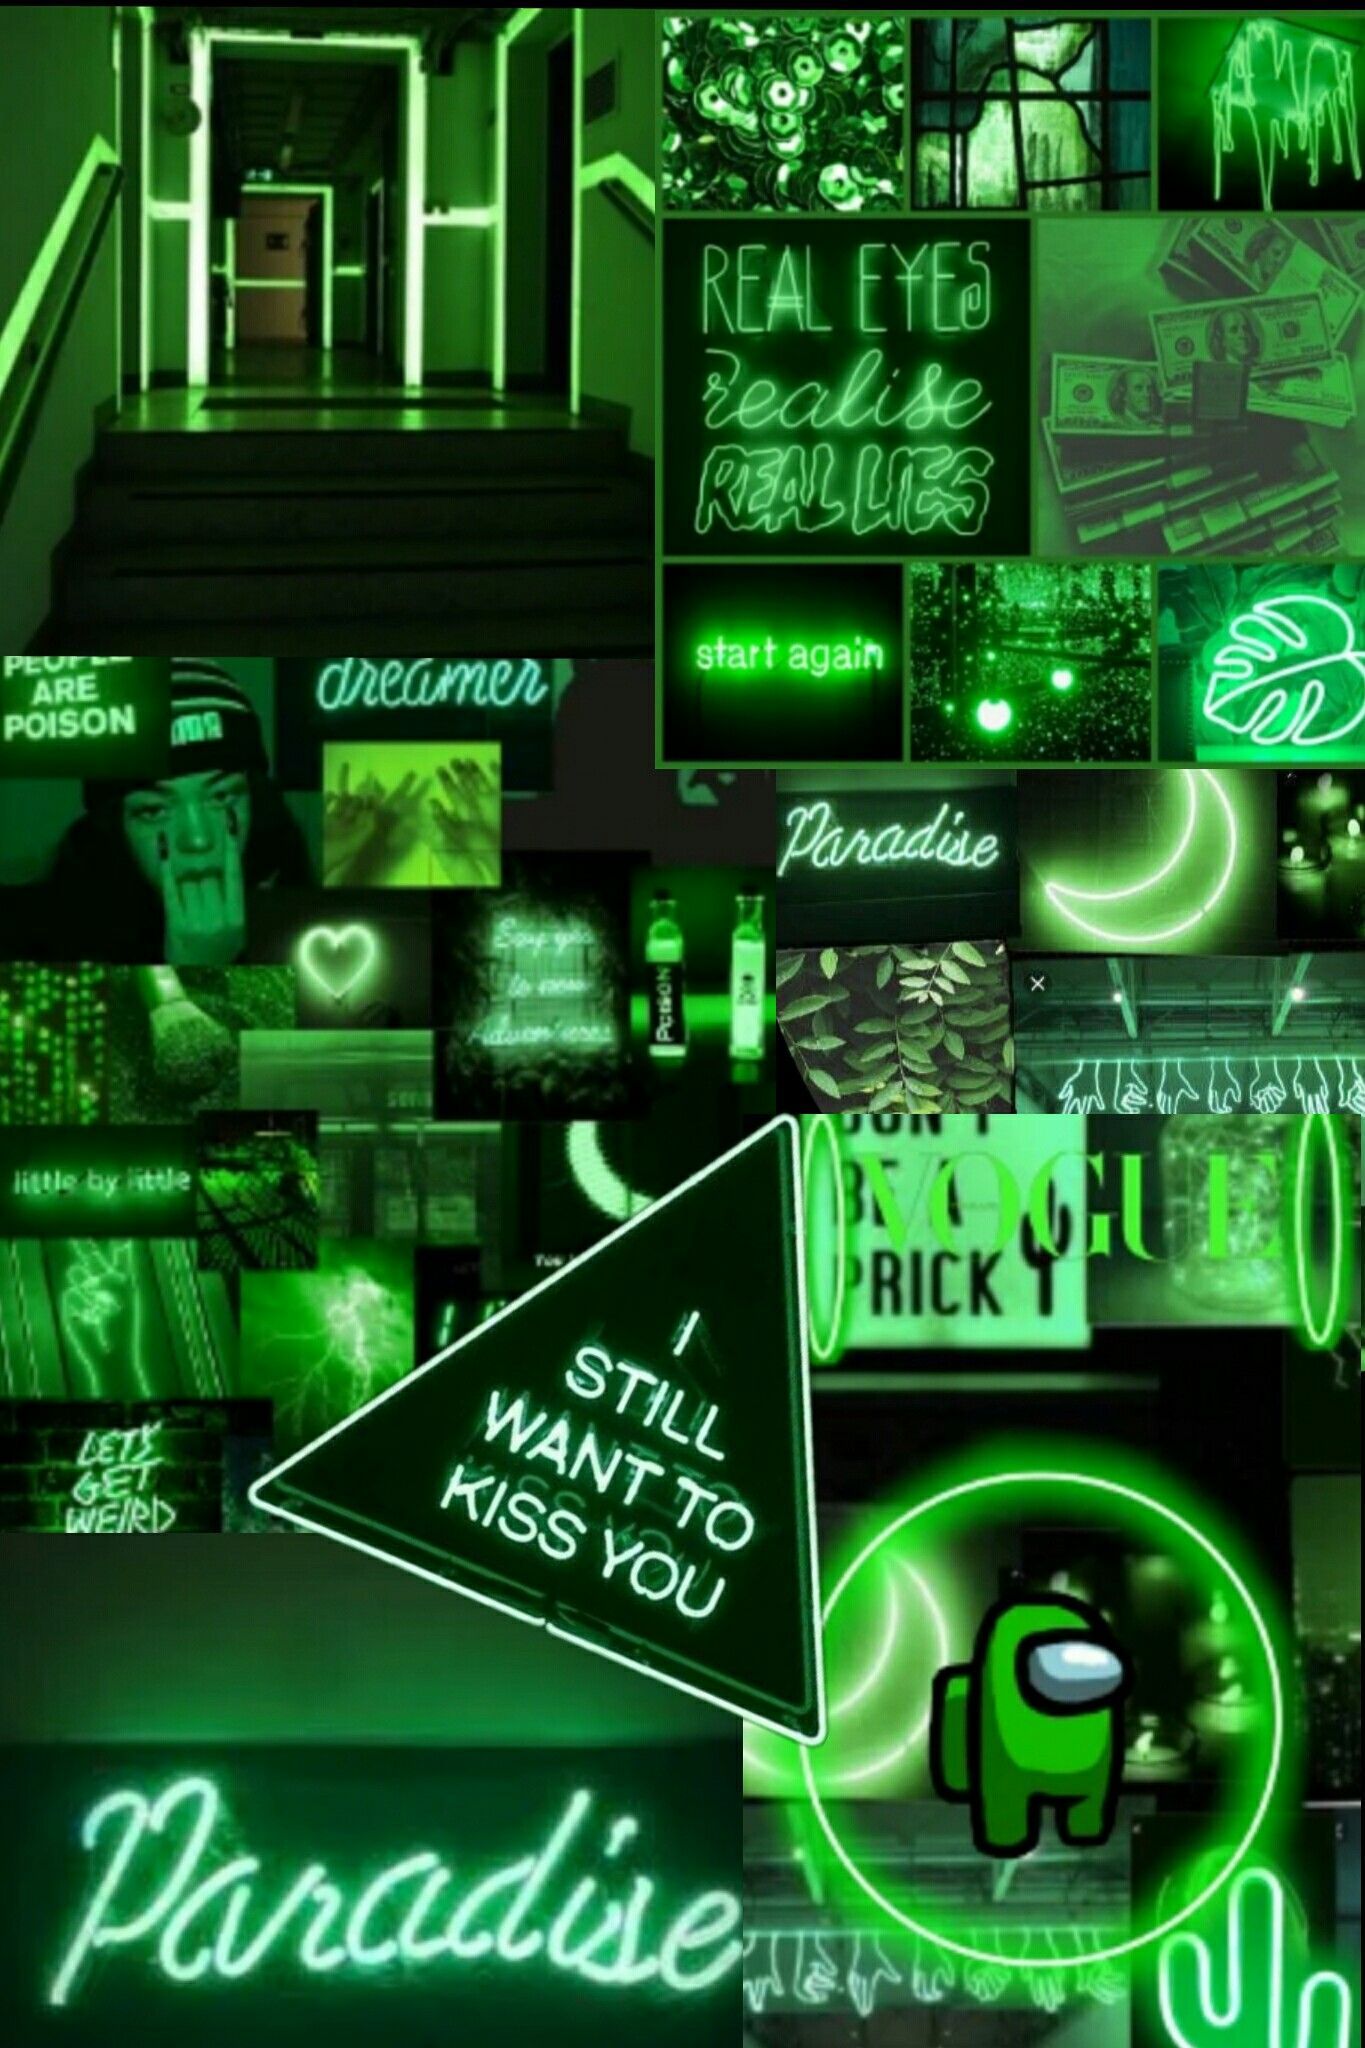 A collage of green neon signs with different messages - Green, neon green, lime green